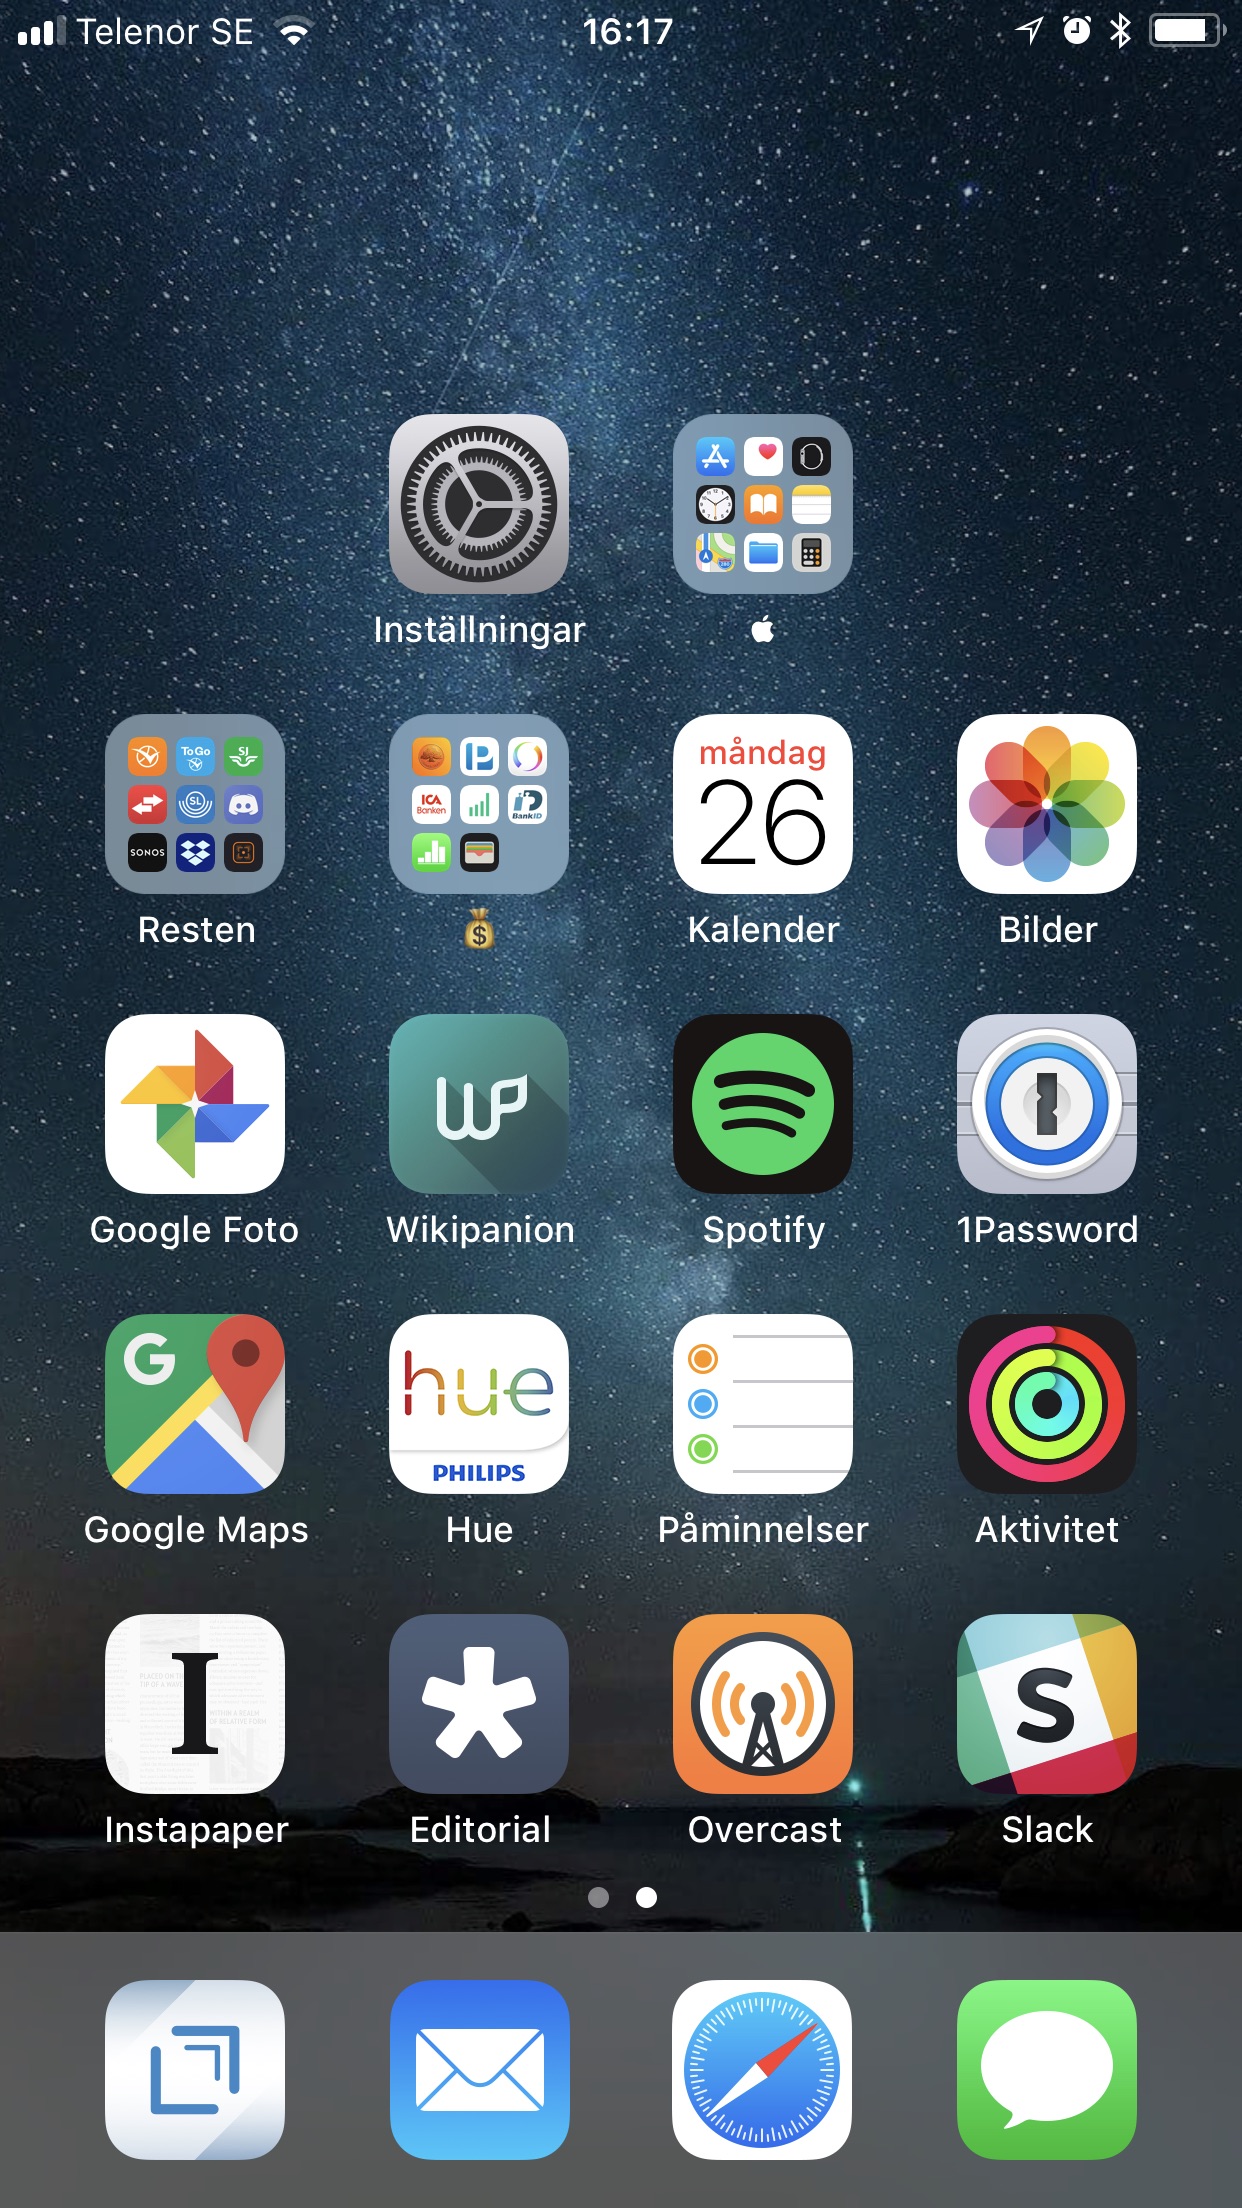 Iphone home screen, February 2018 edition